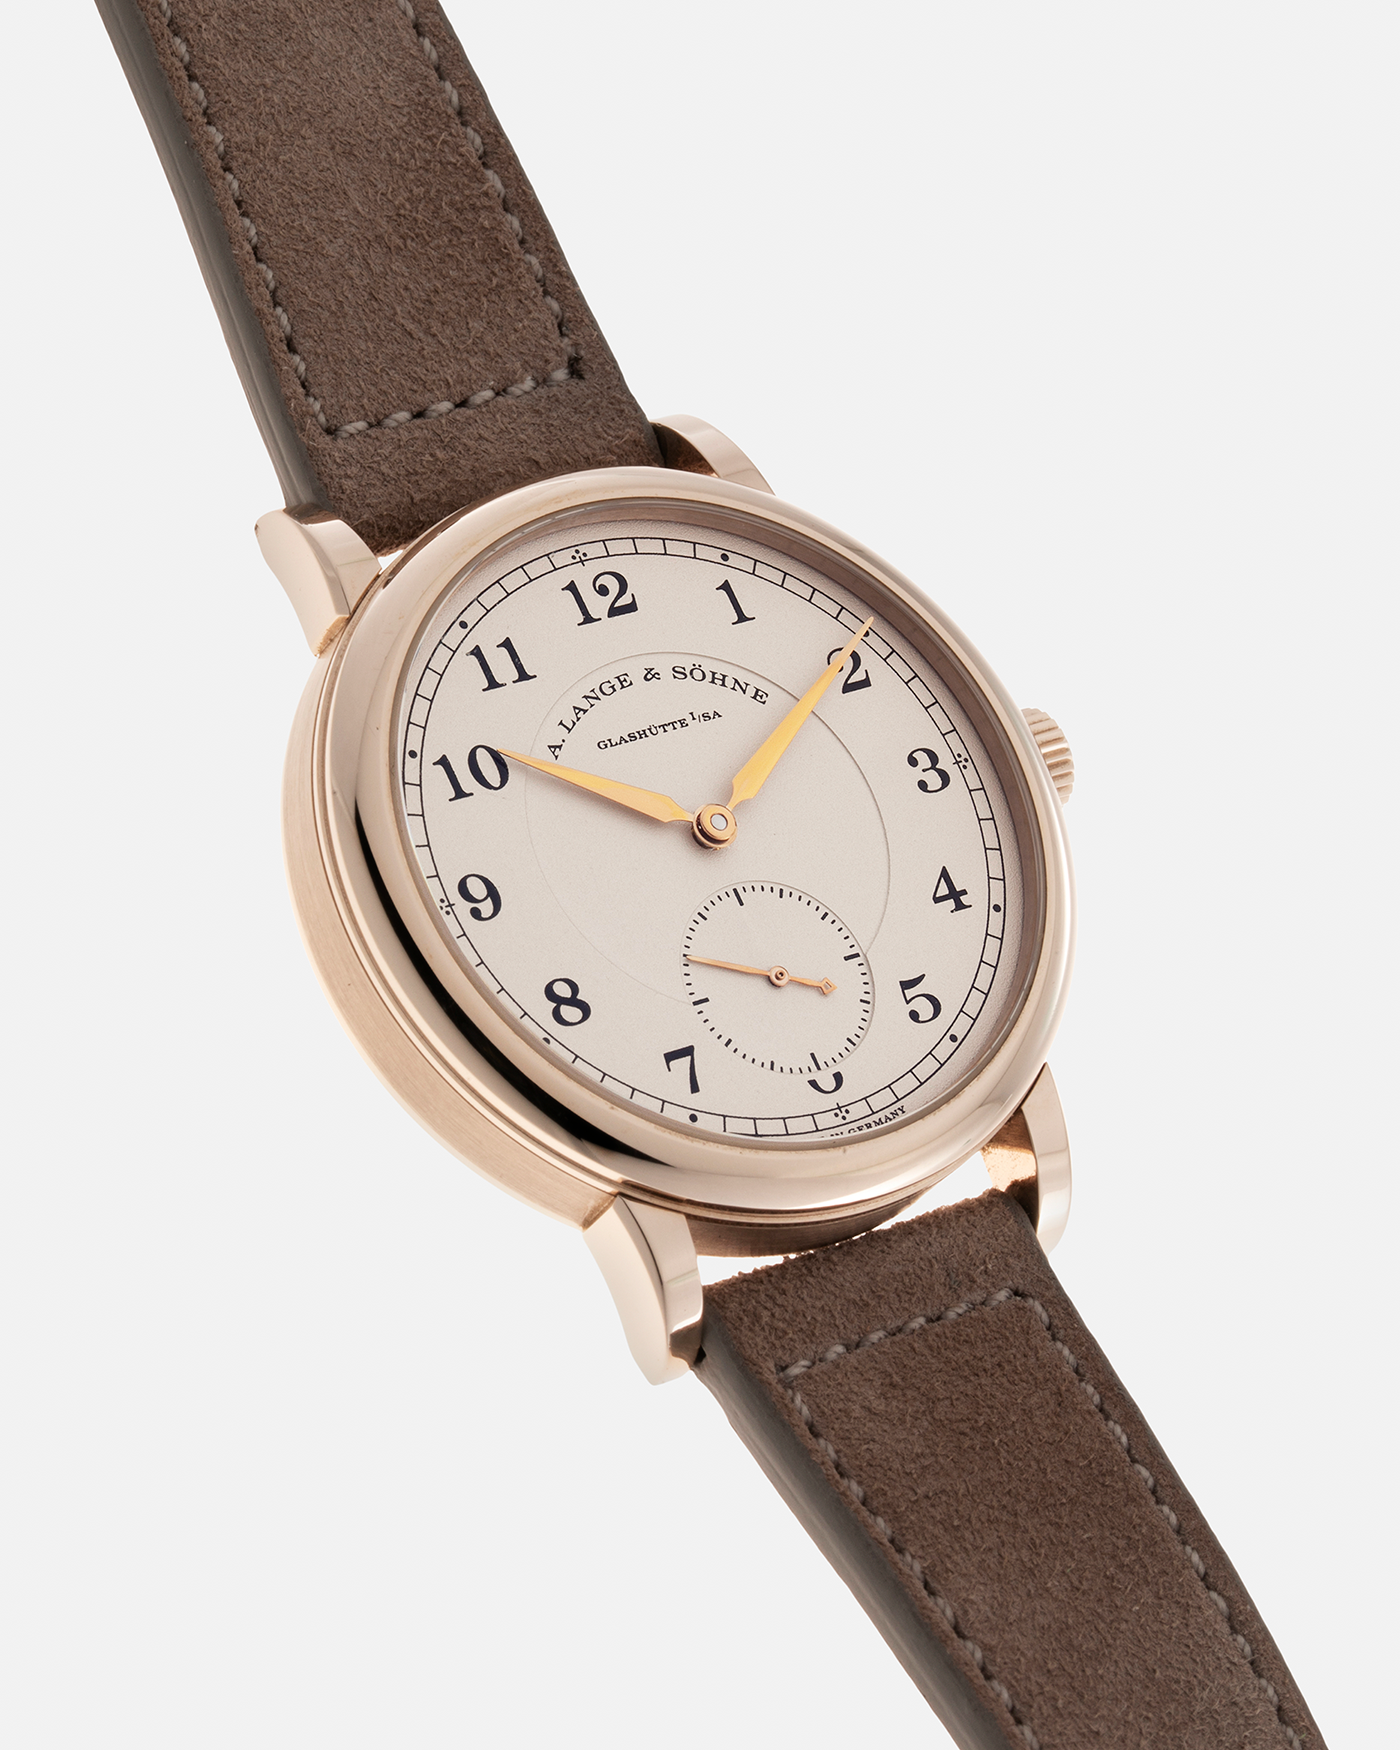 Brand: A. Lange & Söhne Year: 2015 Model: 1815 200th Anniversary F. A. Lange, Limited Edition of 200 pieces Ref Number: 236.050 Material: Honey Gold Movement: A. Lange & Söhne Cal. L051.1, Manual-Winding Case Diameter: 40m Lug Width: 20mm Strap: Molequin Taupe Suede Strap with Signed Honey Gold Tang Buckle, additional A. Lange & Söhne Black Alligator Leather Strap